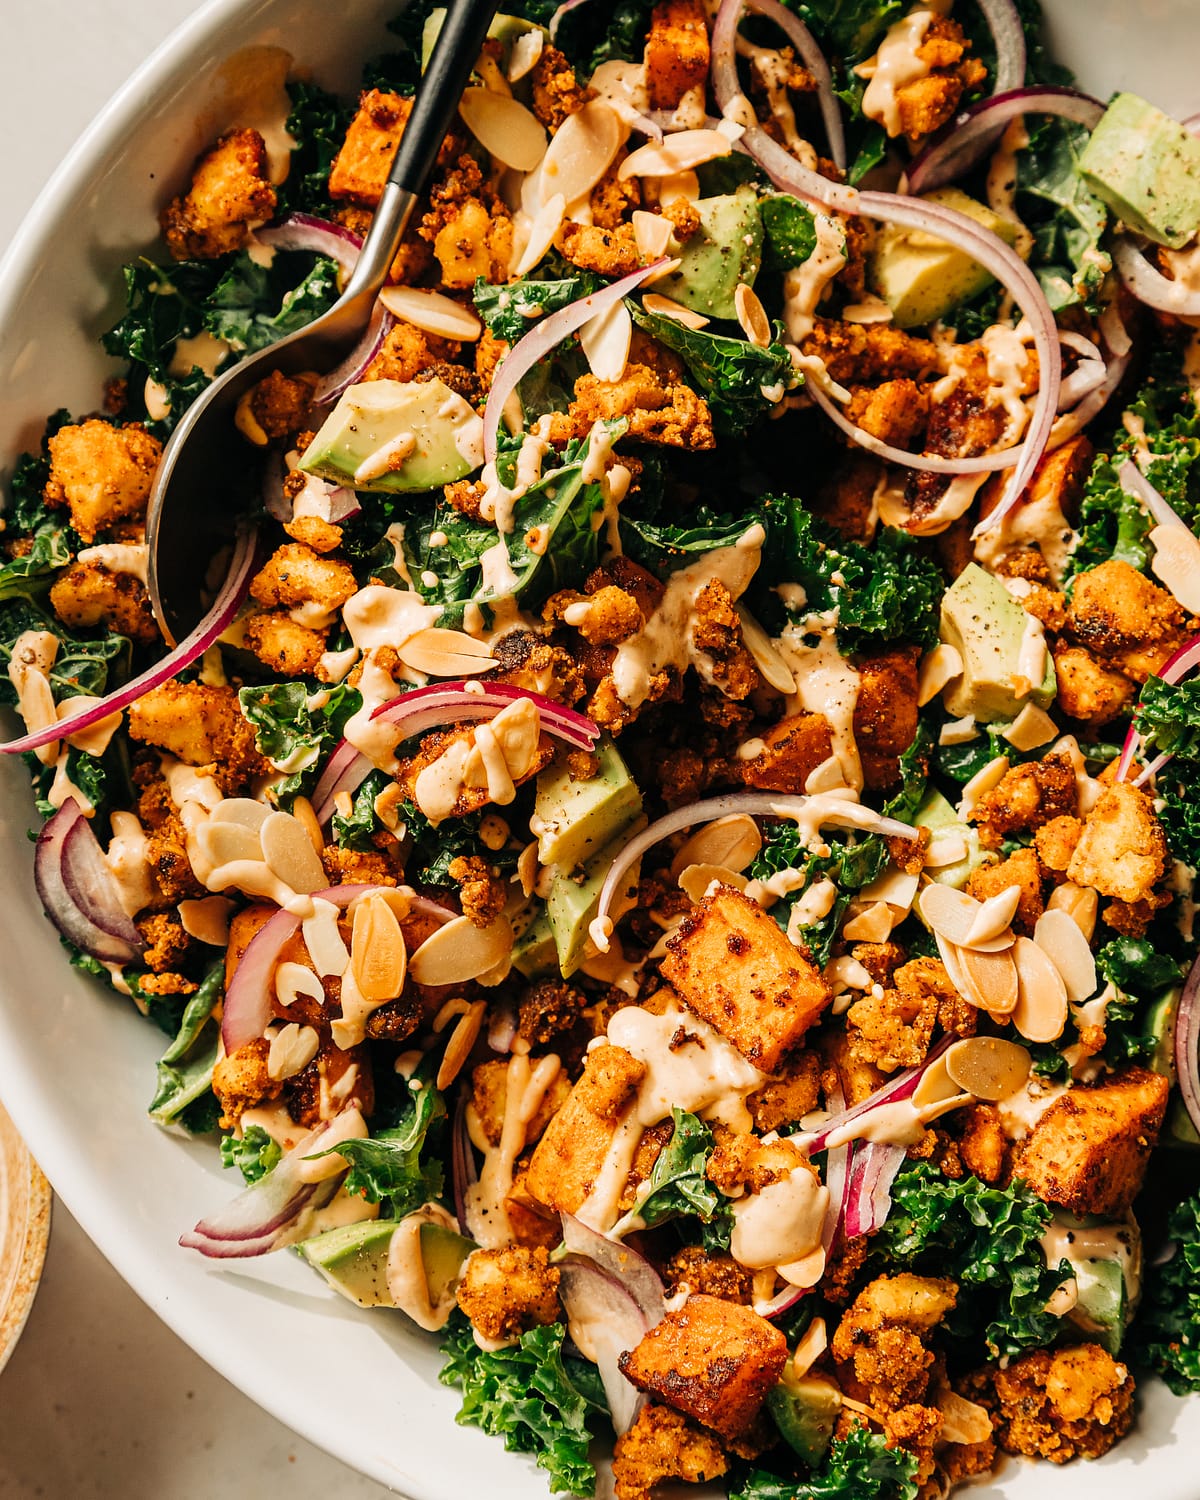 An overhead shot of a kale salad with creamy dressing on top, crispy bits of tofu, chunks of roasted sweet potato, slices of red onion, and cubes of avocado. The salad is in a white bowl.